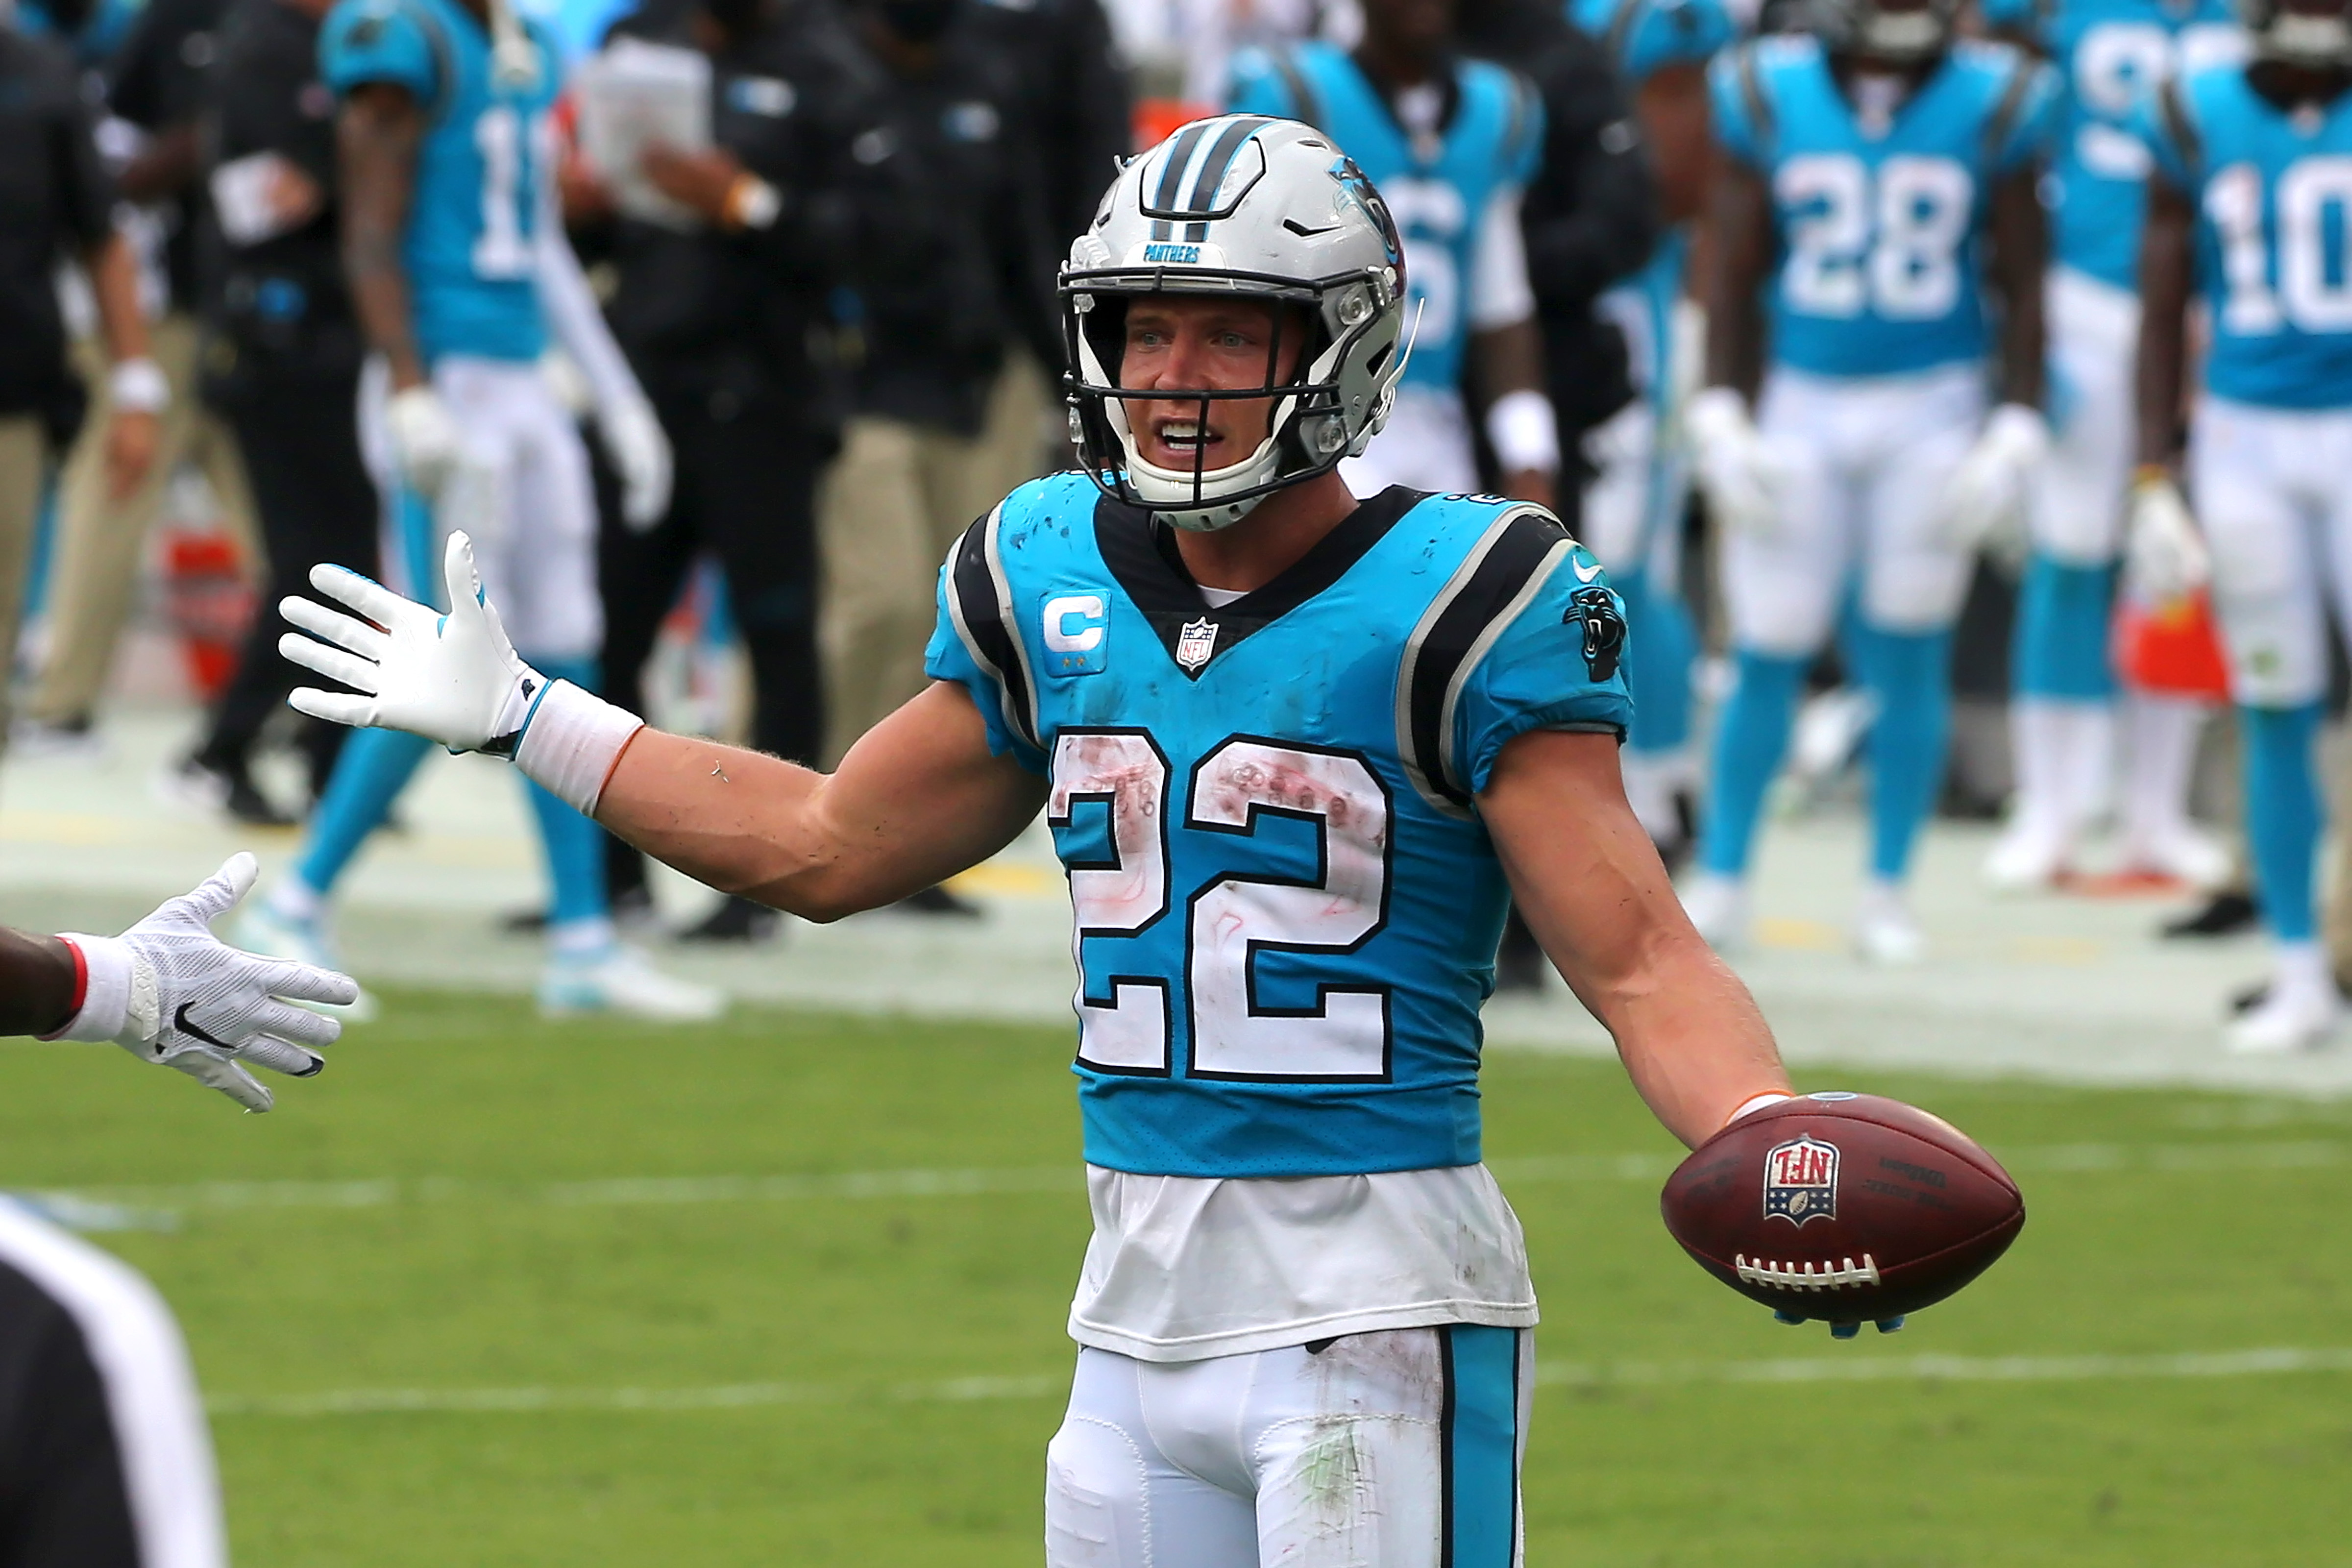 Christian McCaffrey looks to the sideline after a play